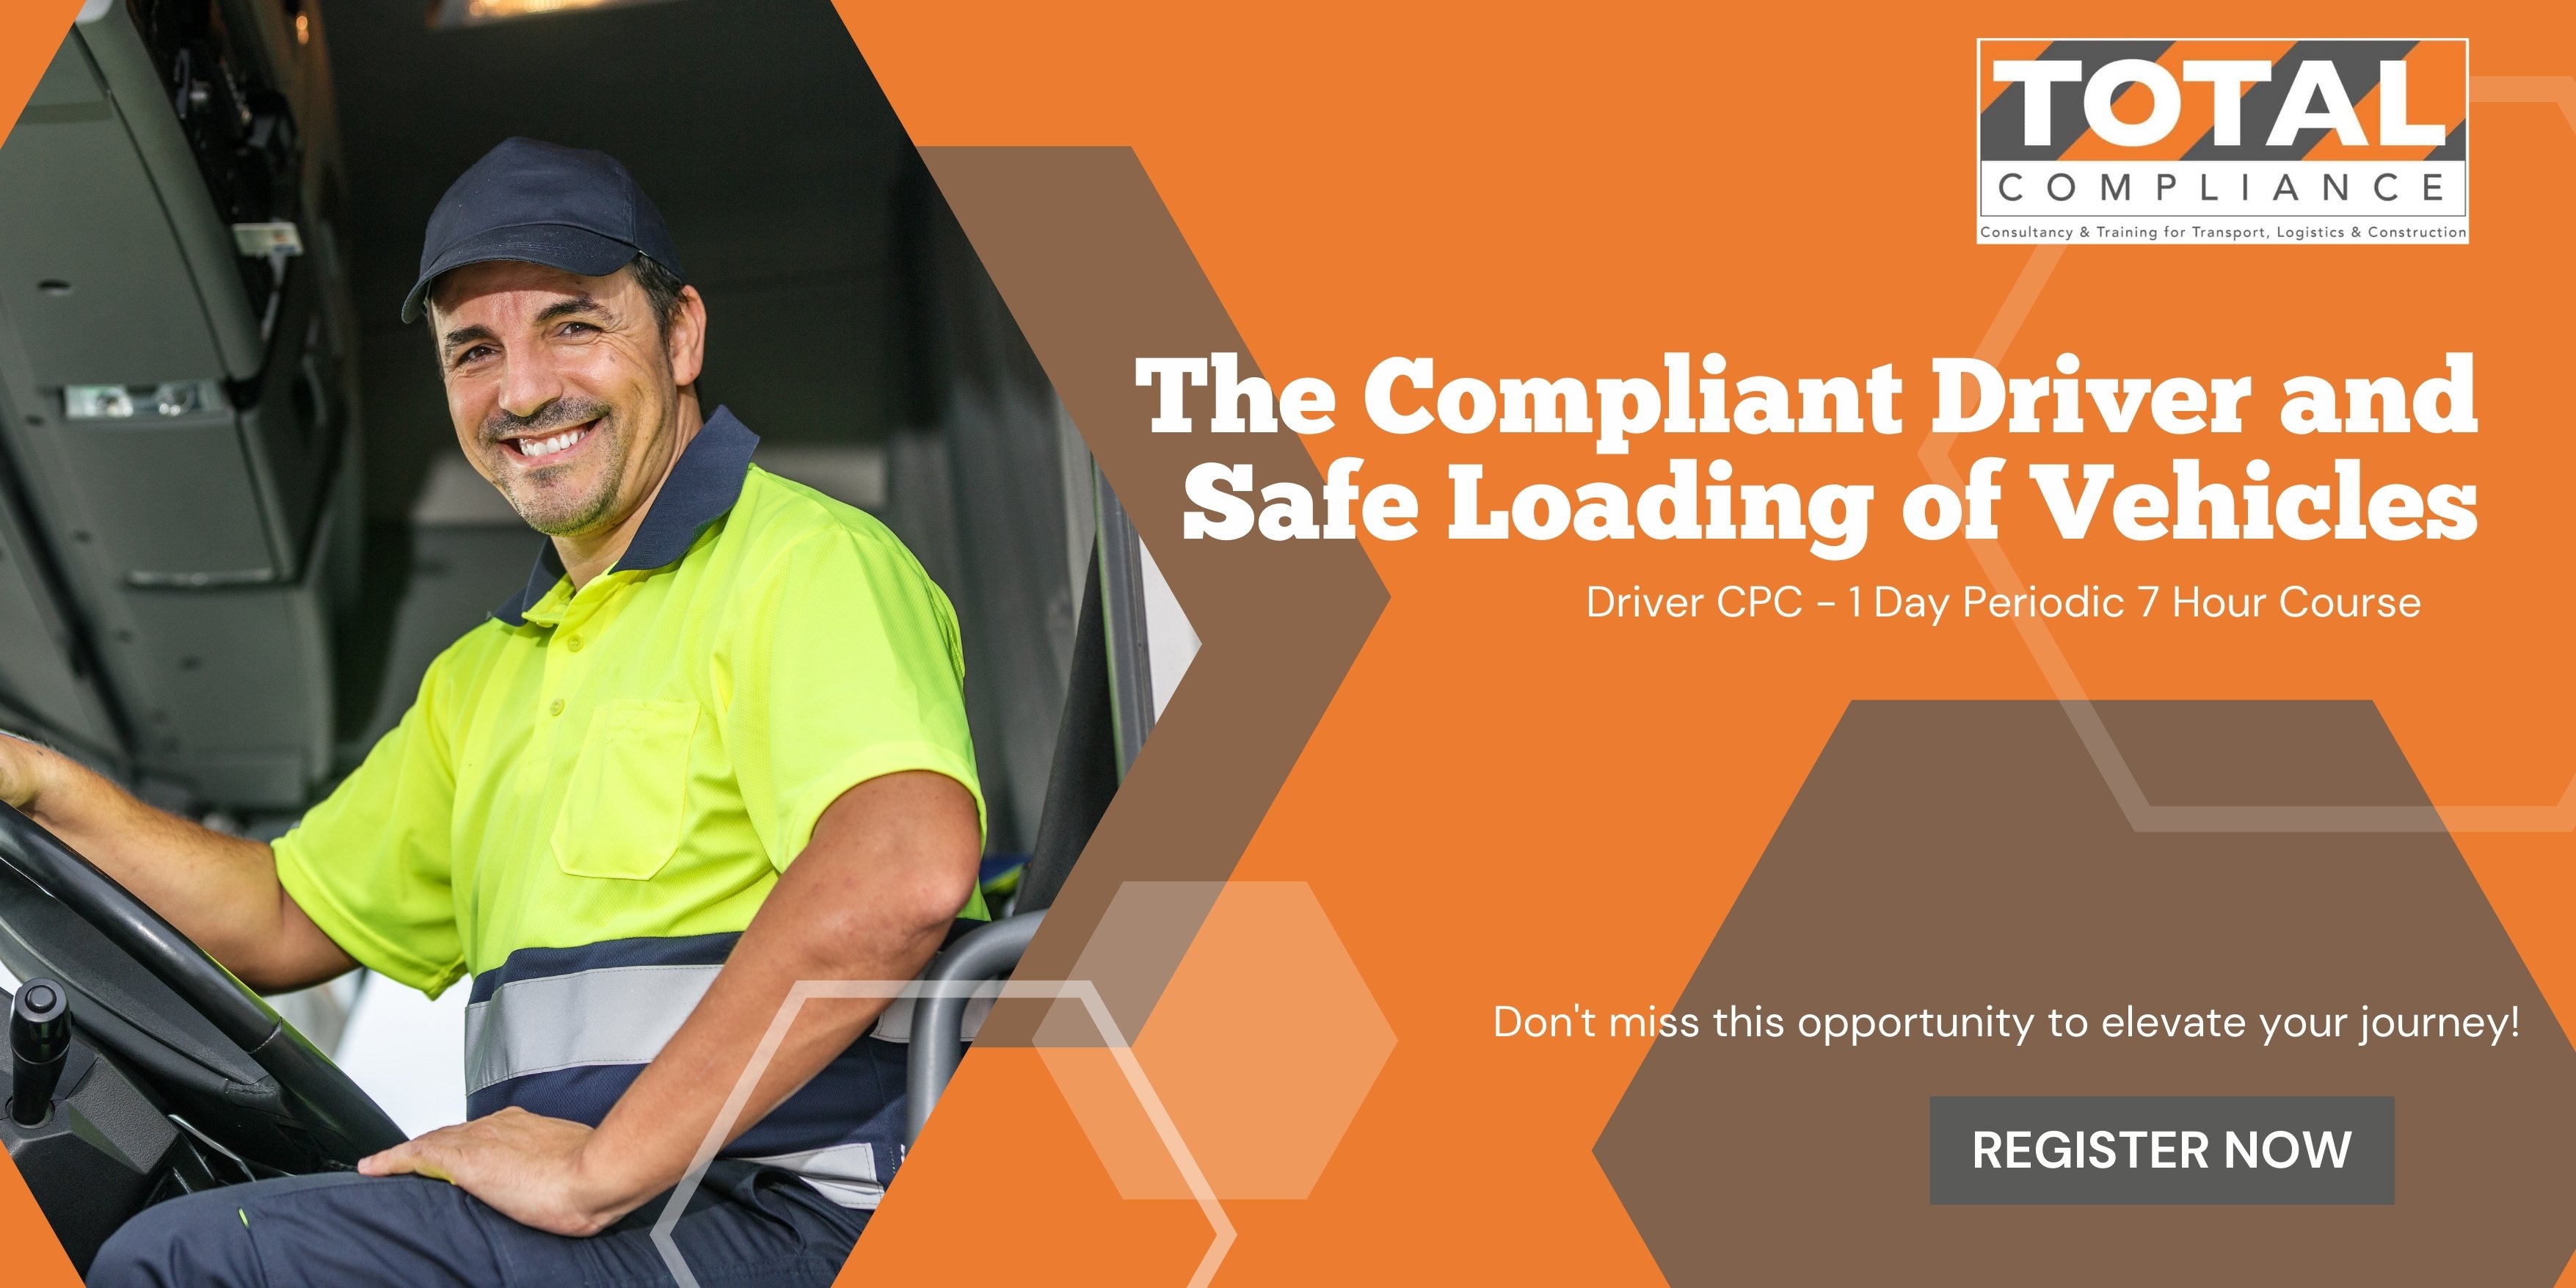 Driver CPC - 1 Day Periodic 7 Hour Course/ The Compliant Driver and Safe Loading of Vehicles